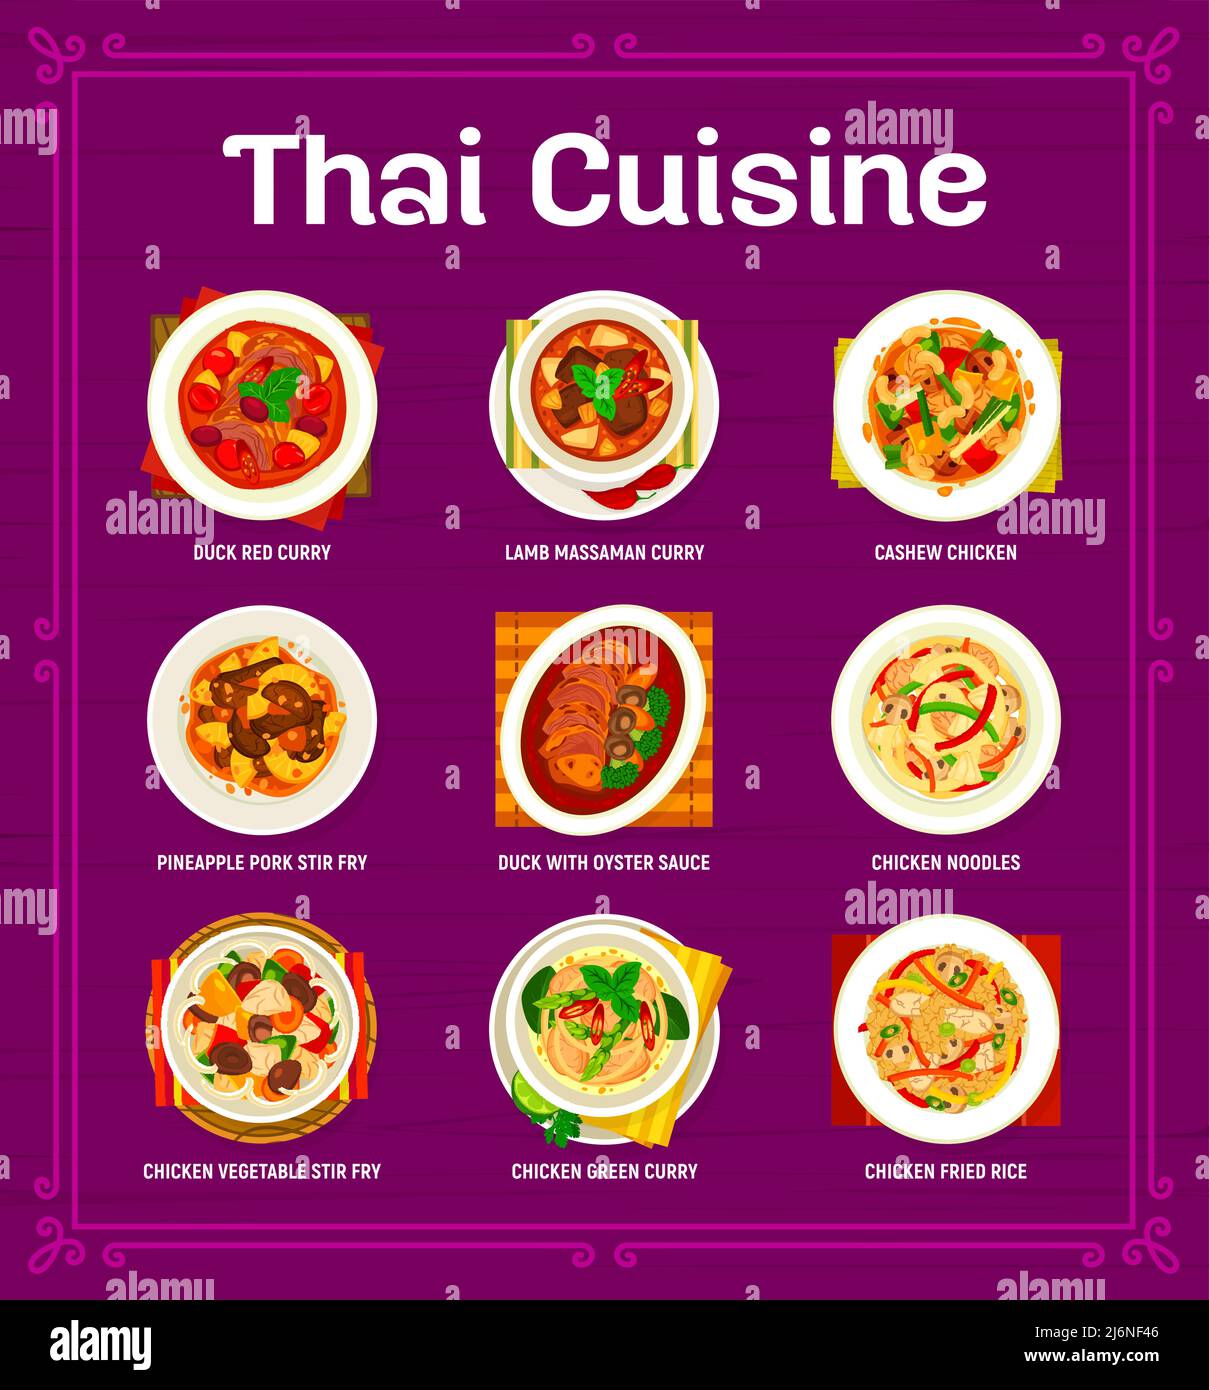 Thai cuisine menu, Asian restaurant food dishes and meals, vector. Thai cuisine and food of Bangkok with chicken curry with fried rice, duck in oyster sauce and pineapple pork stir fry Stock Vector